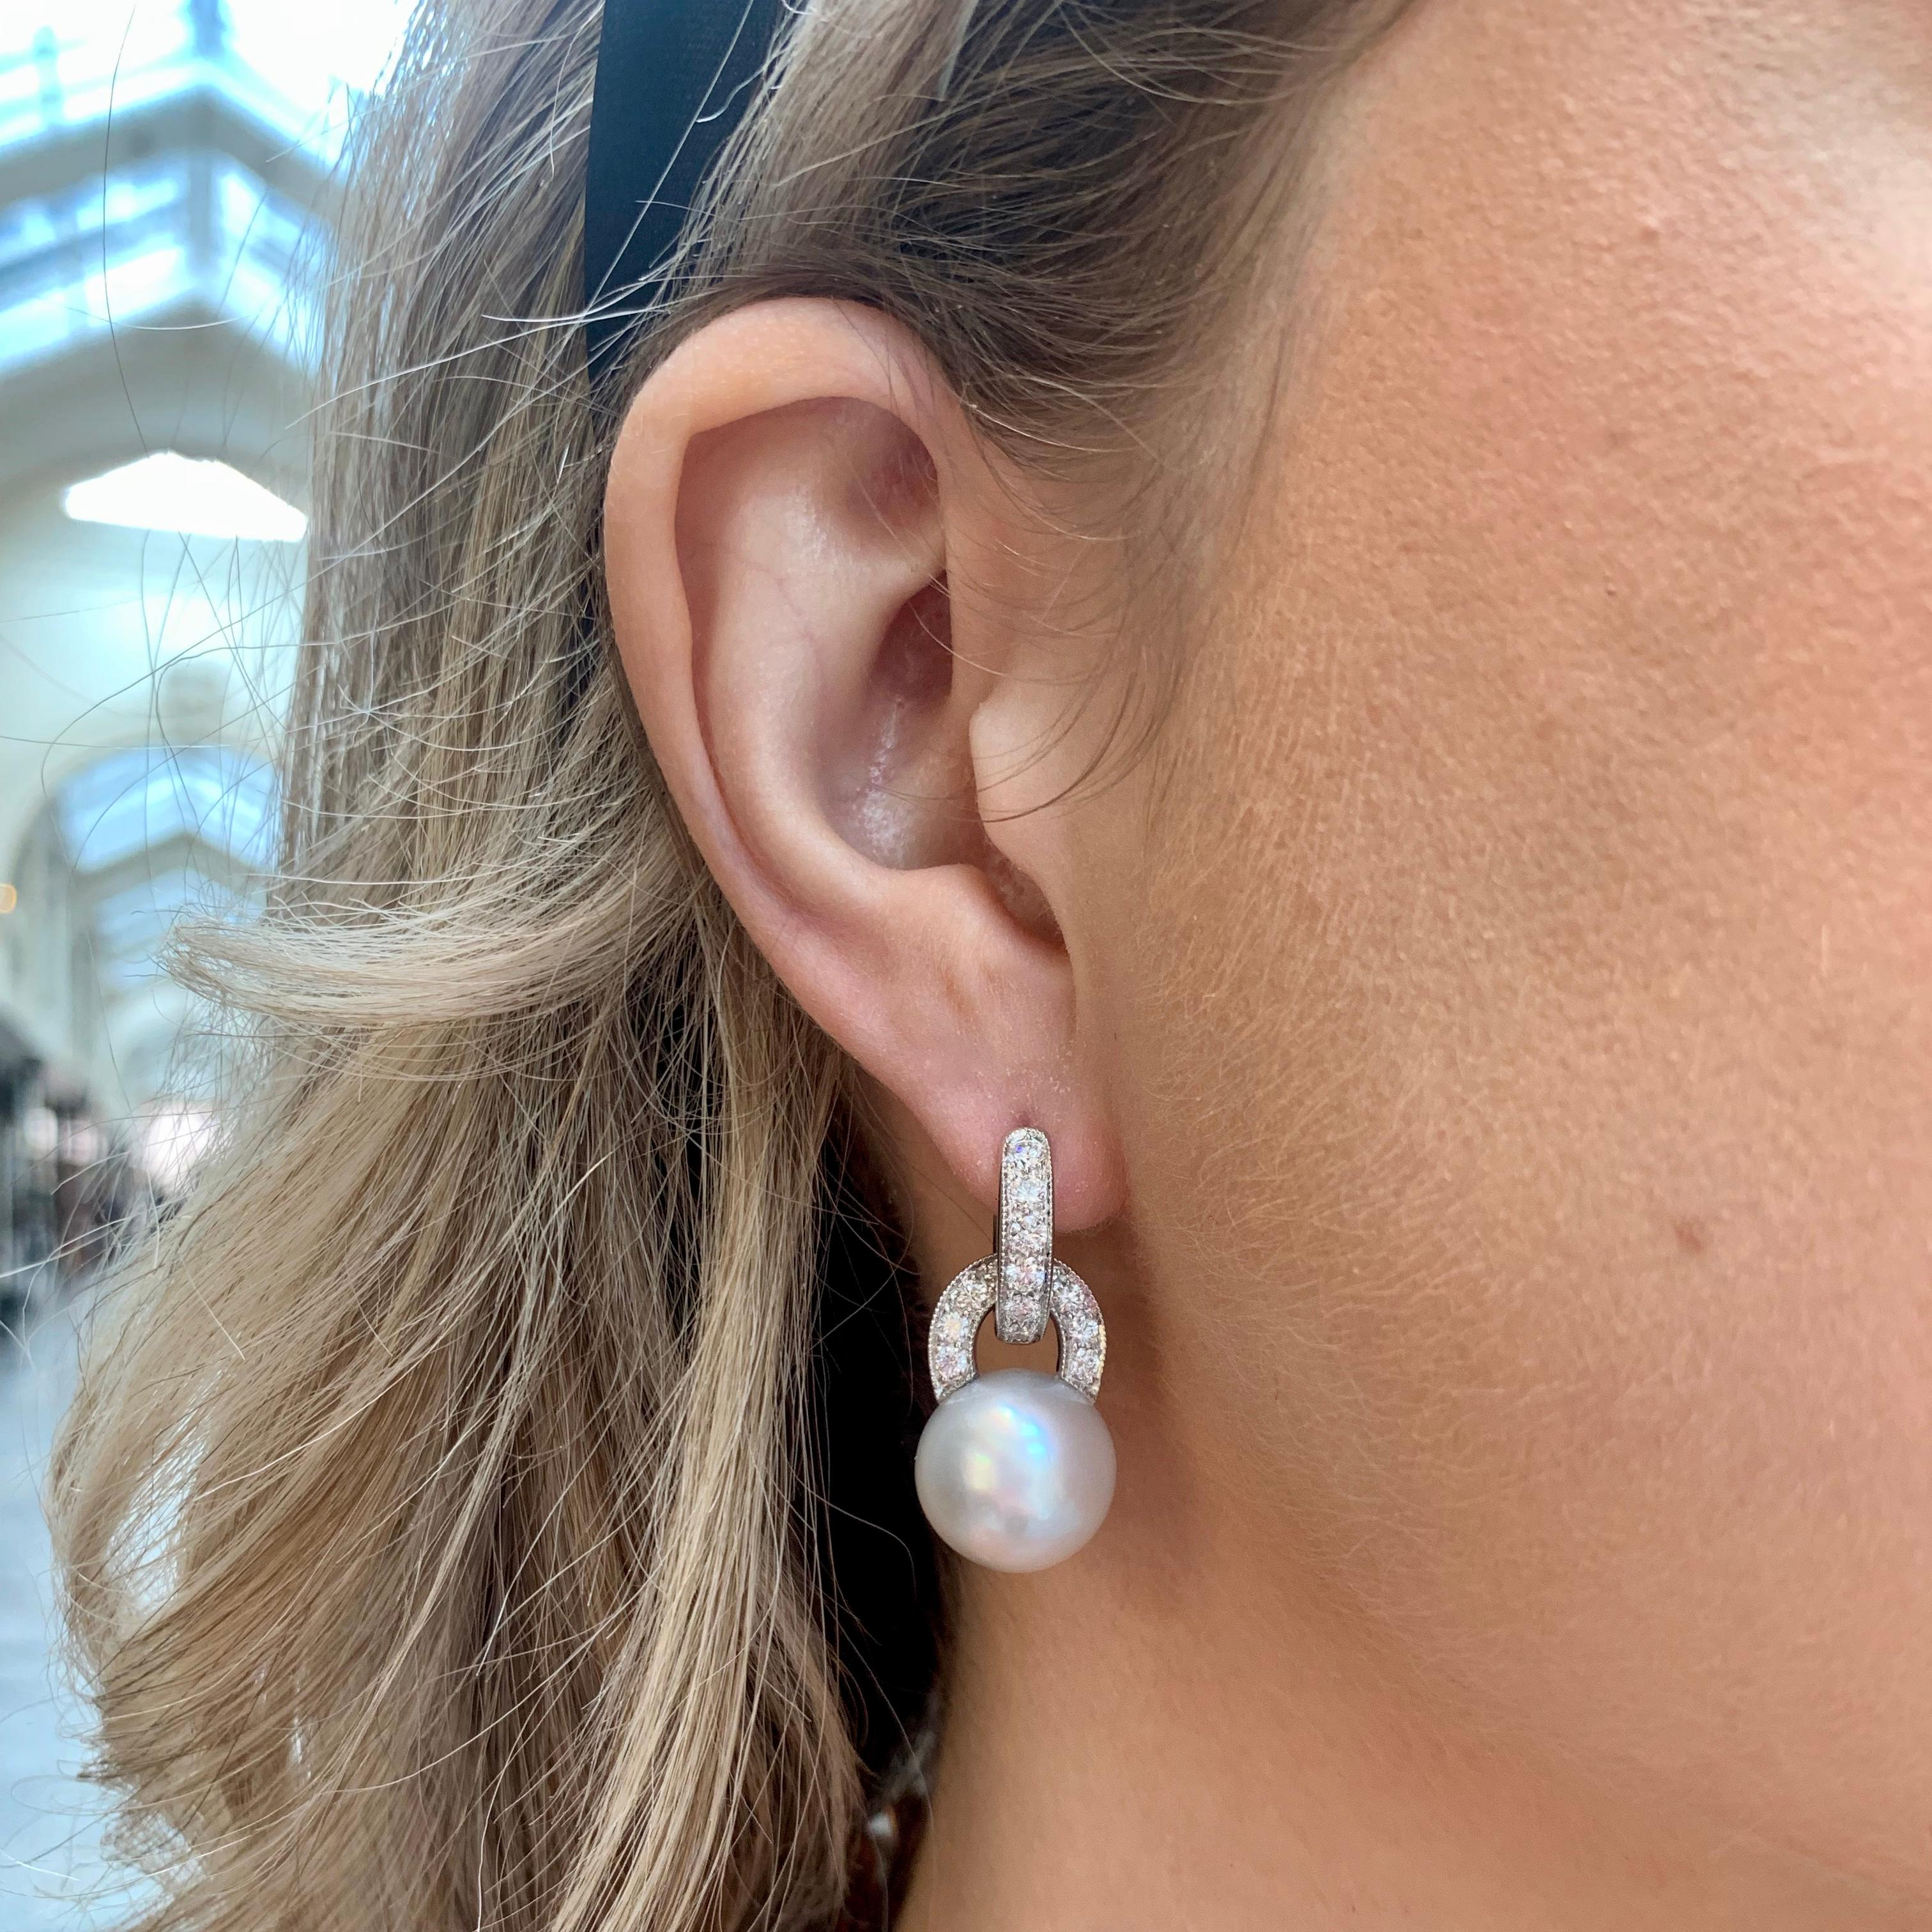  A beautiful pair of convertible pearl and diamond hoop earrings set in platinum.

Each earring is firstly composed of a beautiful hoop set with exactly 7 round brilliant cut diamonds. Hanging from this hoop is a 14-millimetre white cultured pearl